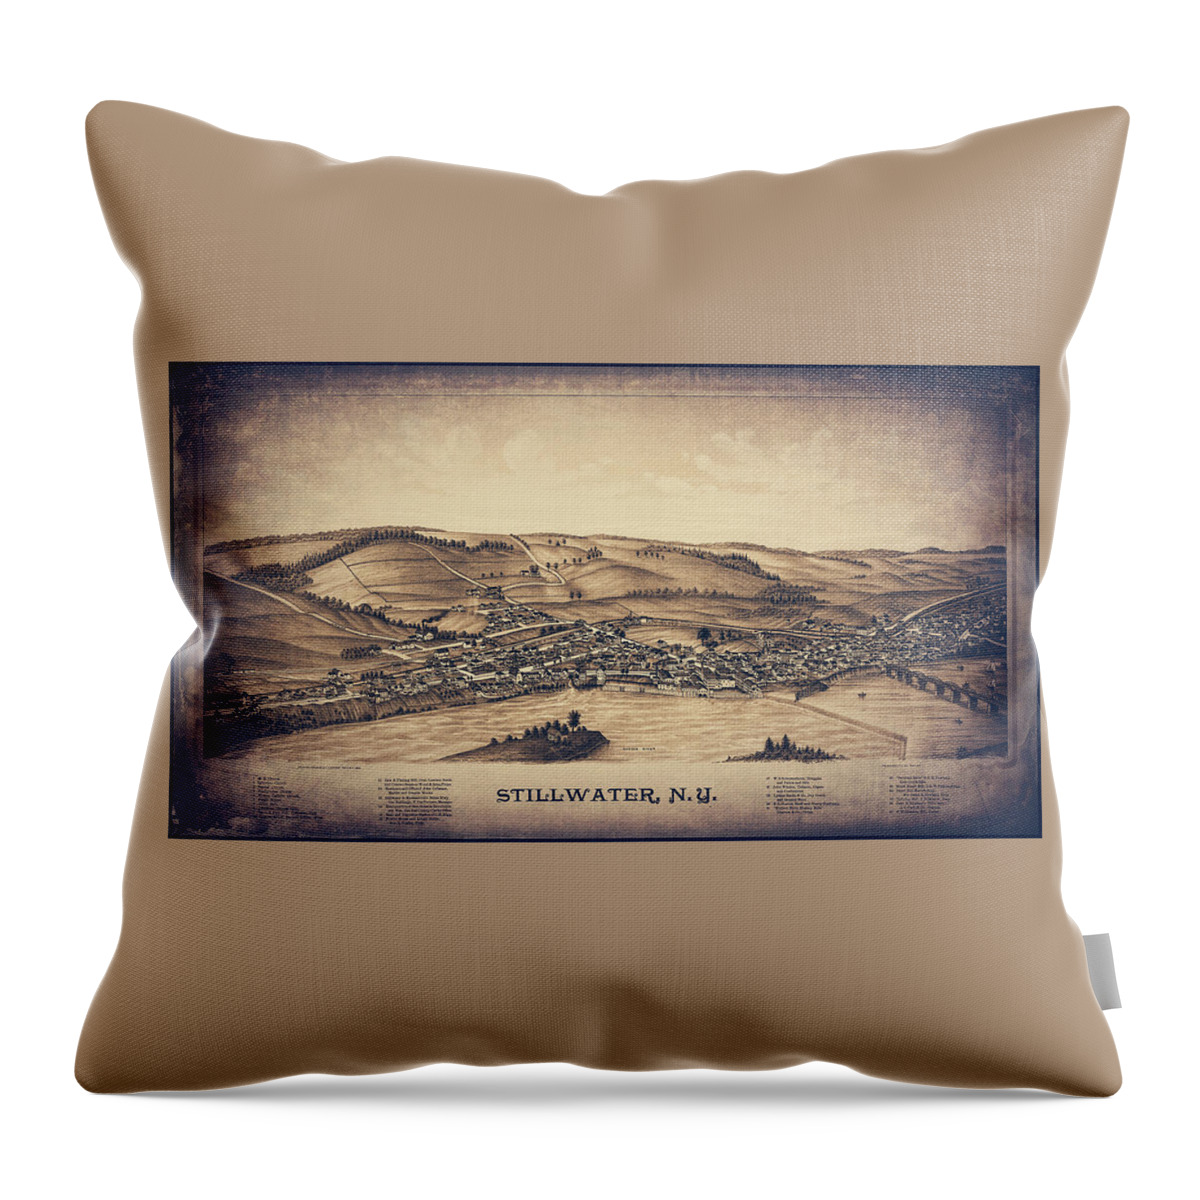 Stillwater Throw Pillow featuring the photograph Stillwater New York Vintage Map Aerial View 1889 Sepia by Carol Japp